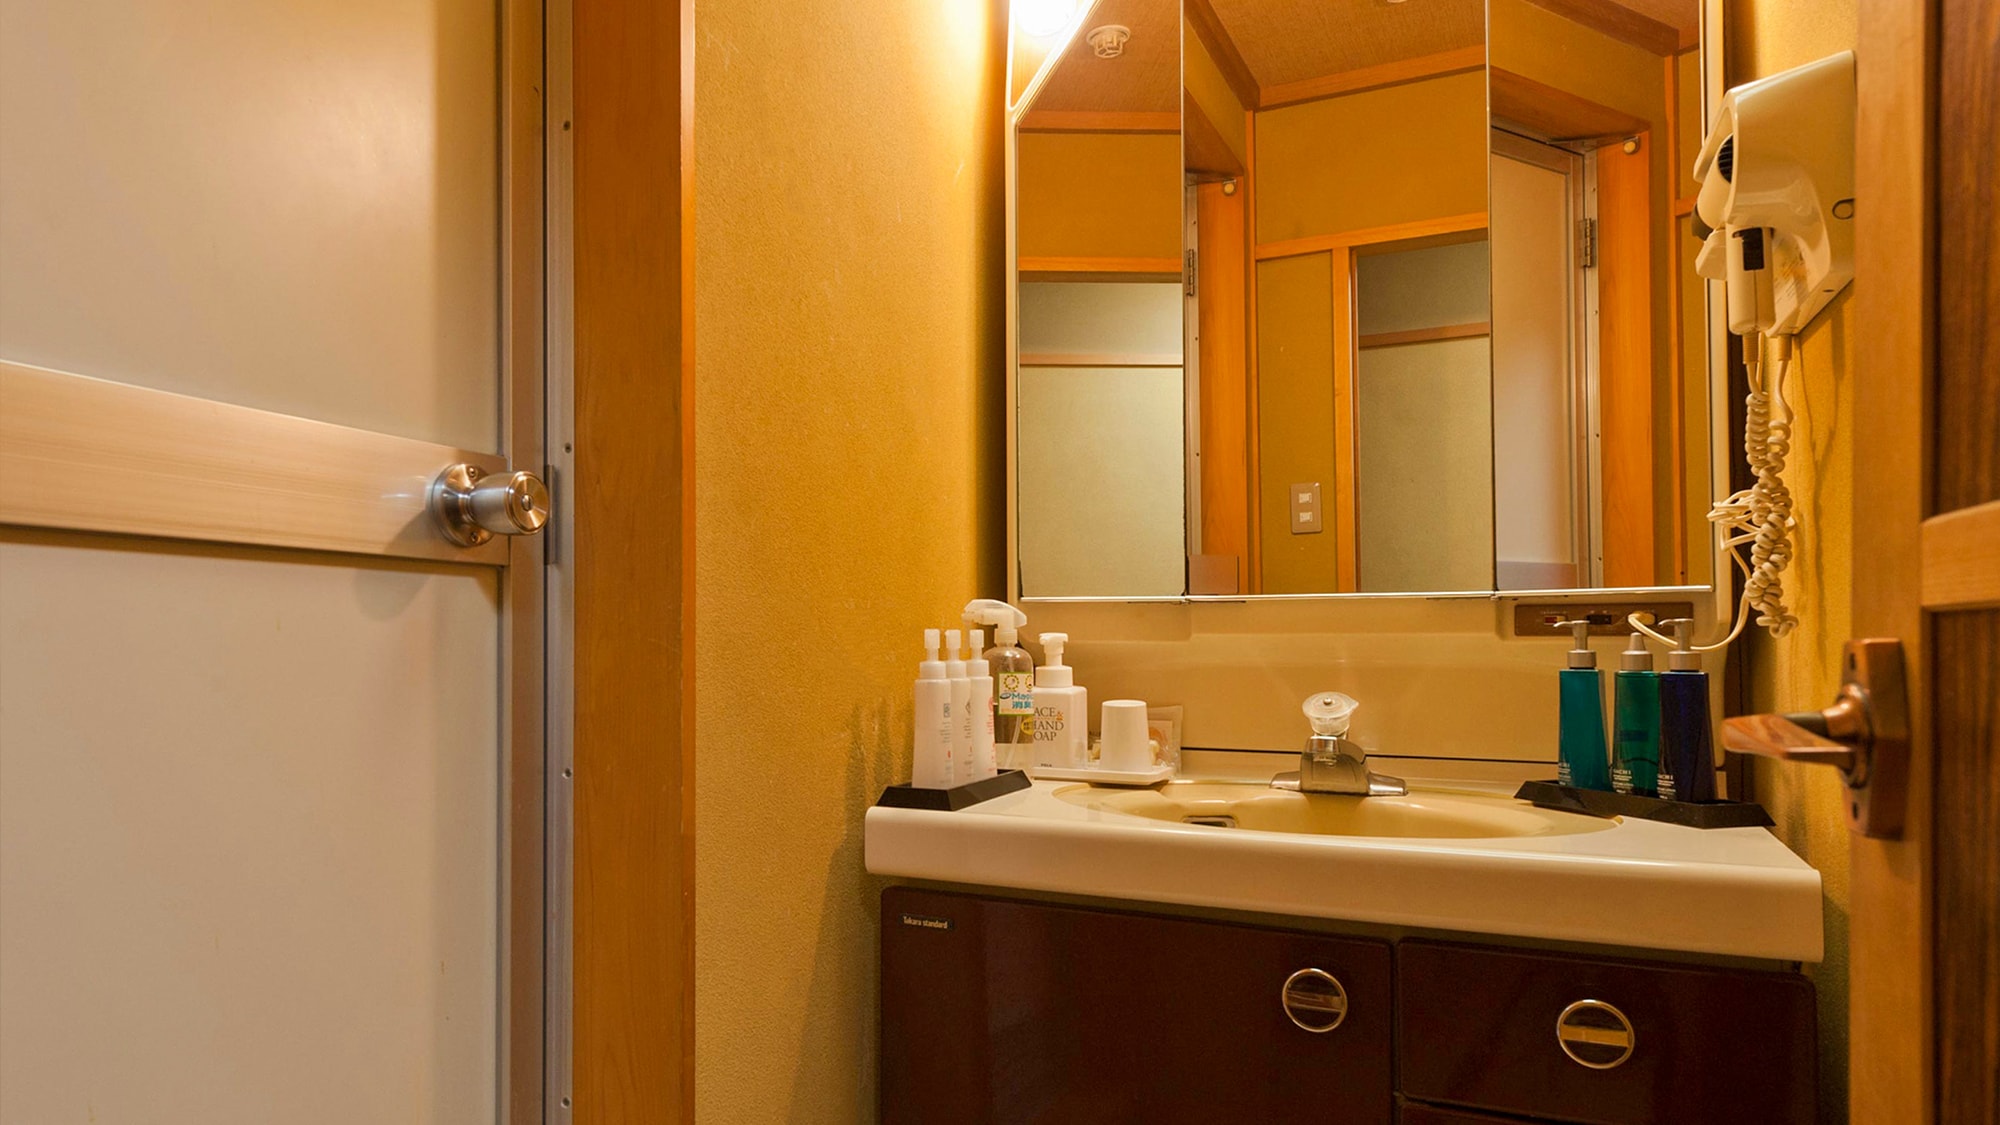 ■Economy guest room｜In addition to cosmetics for women, cosmetics for men are also available in the guest room